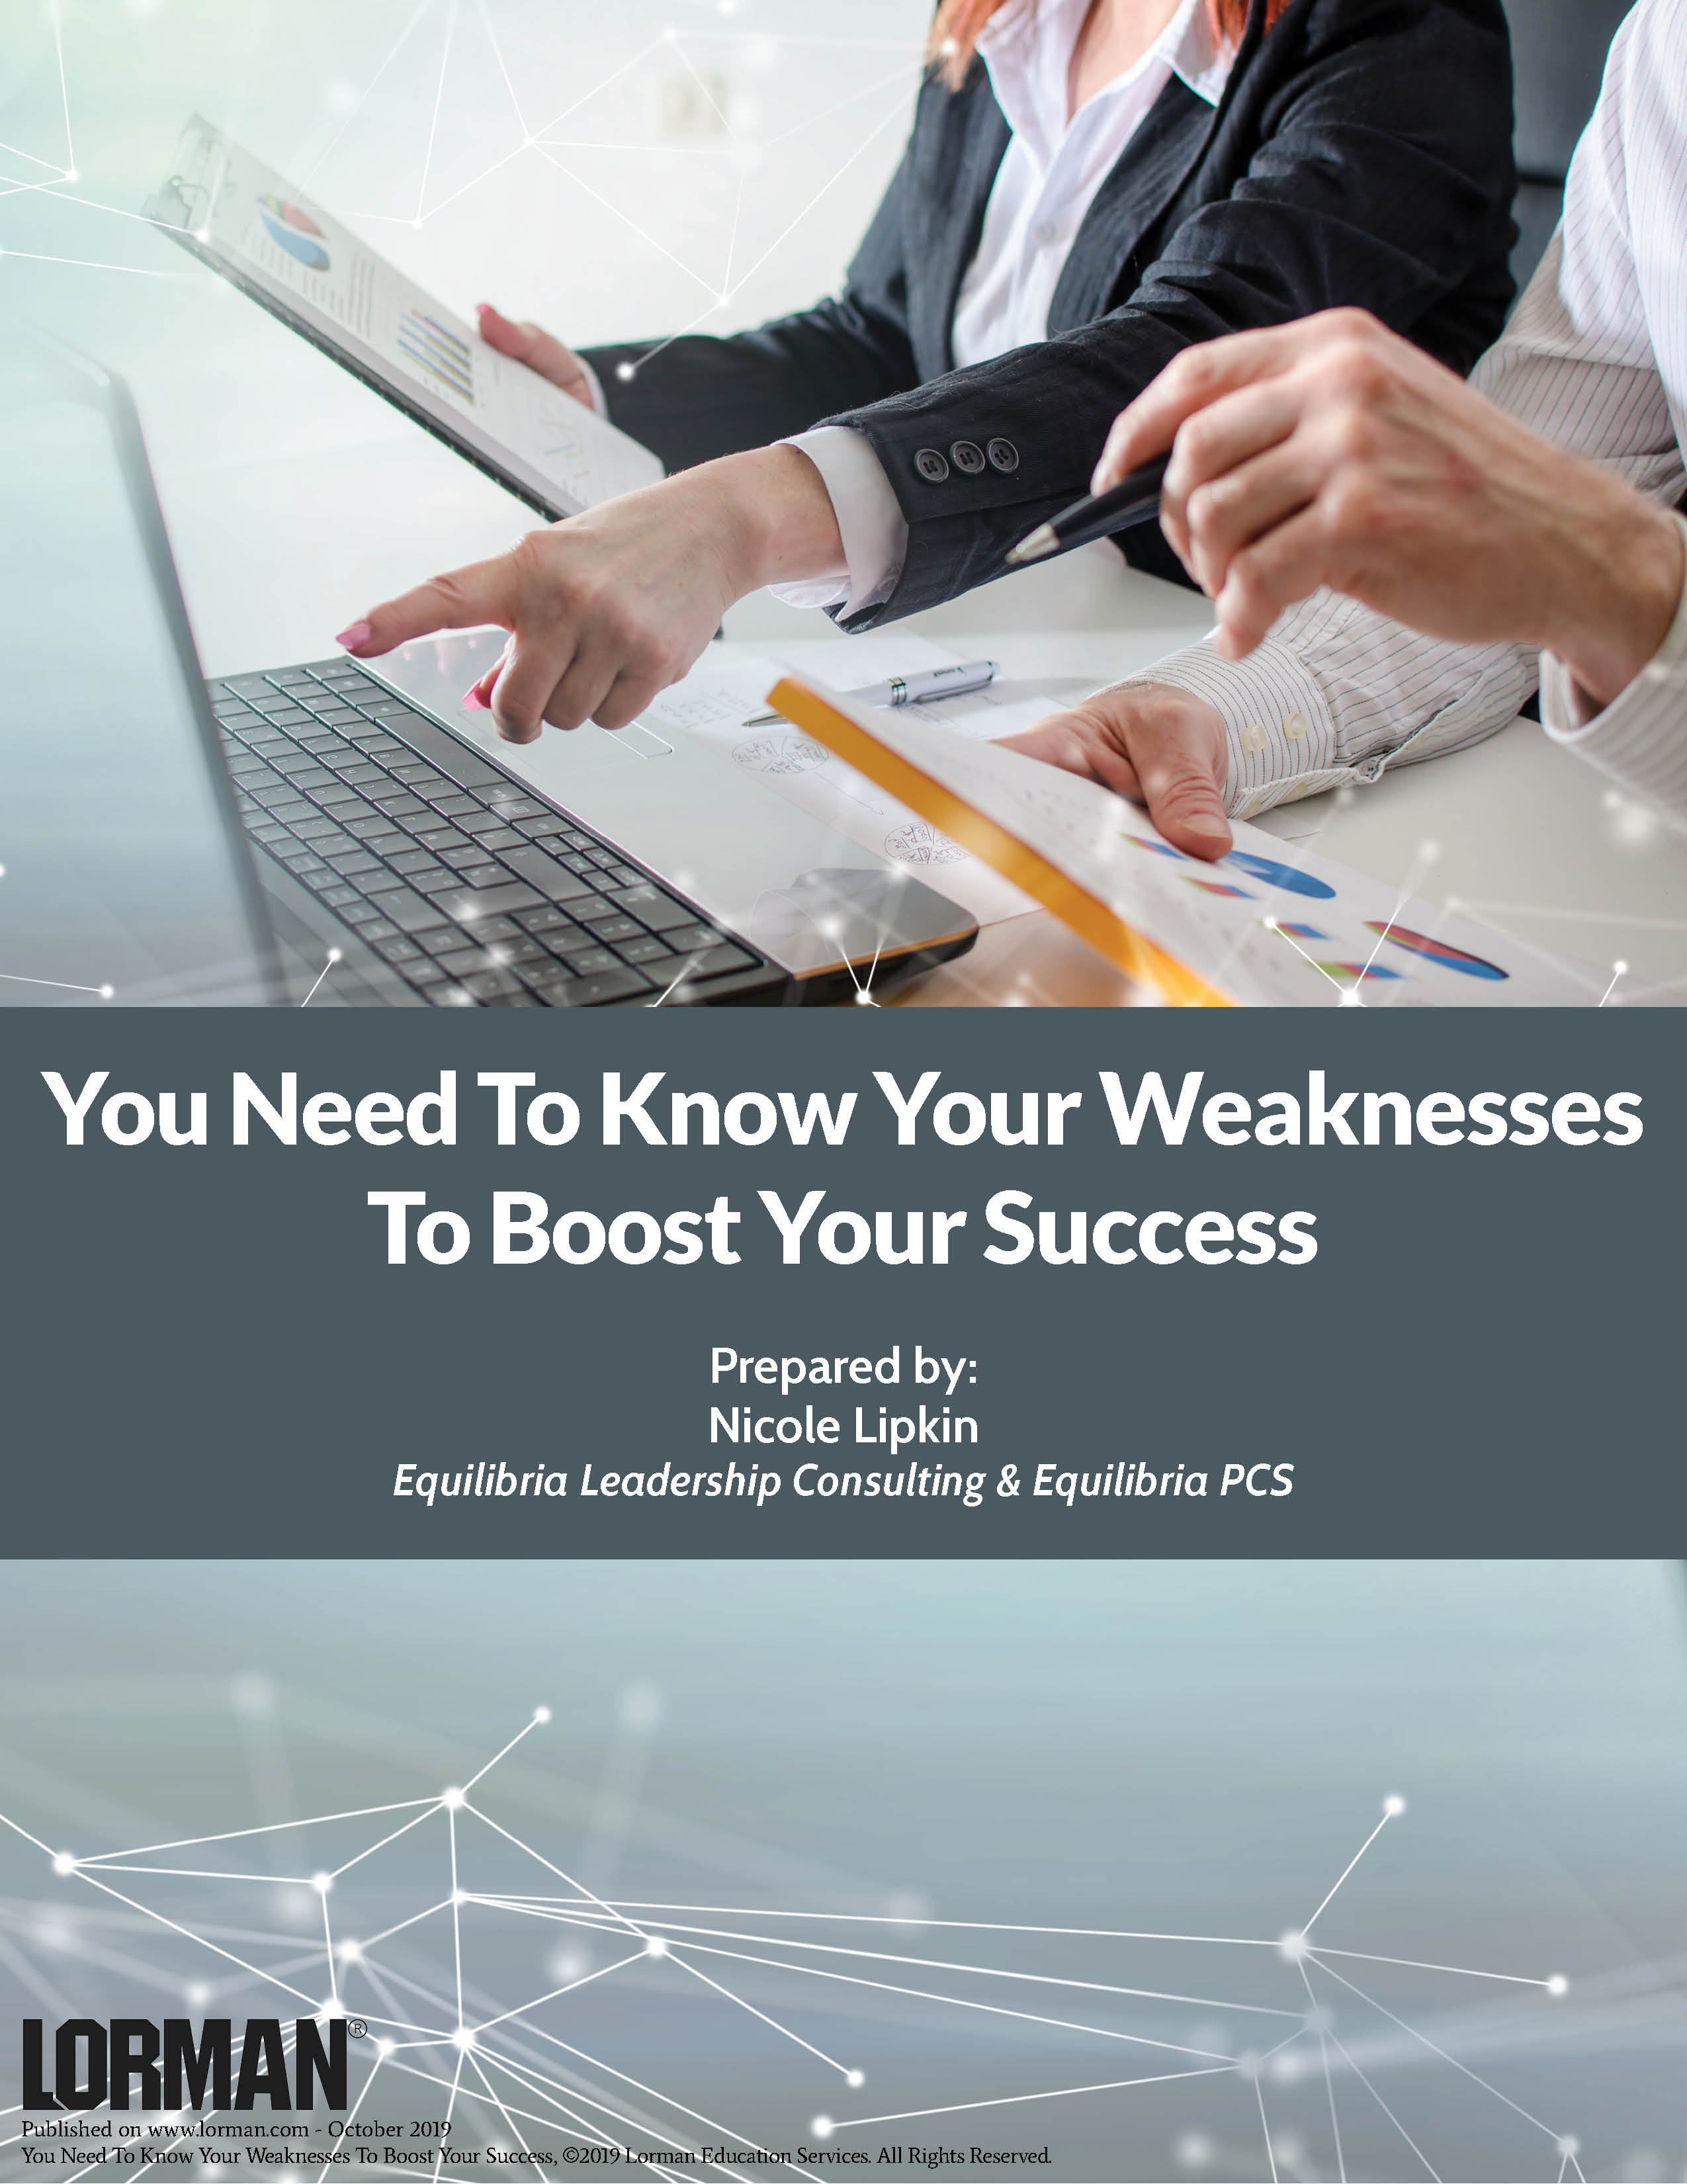 You Need To Know Your Weaknesses To Boost Your Success